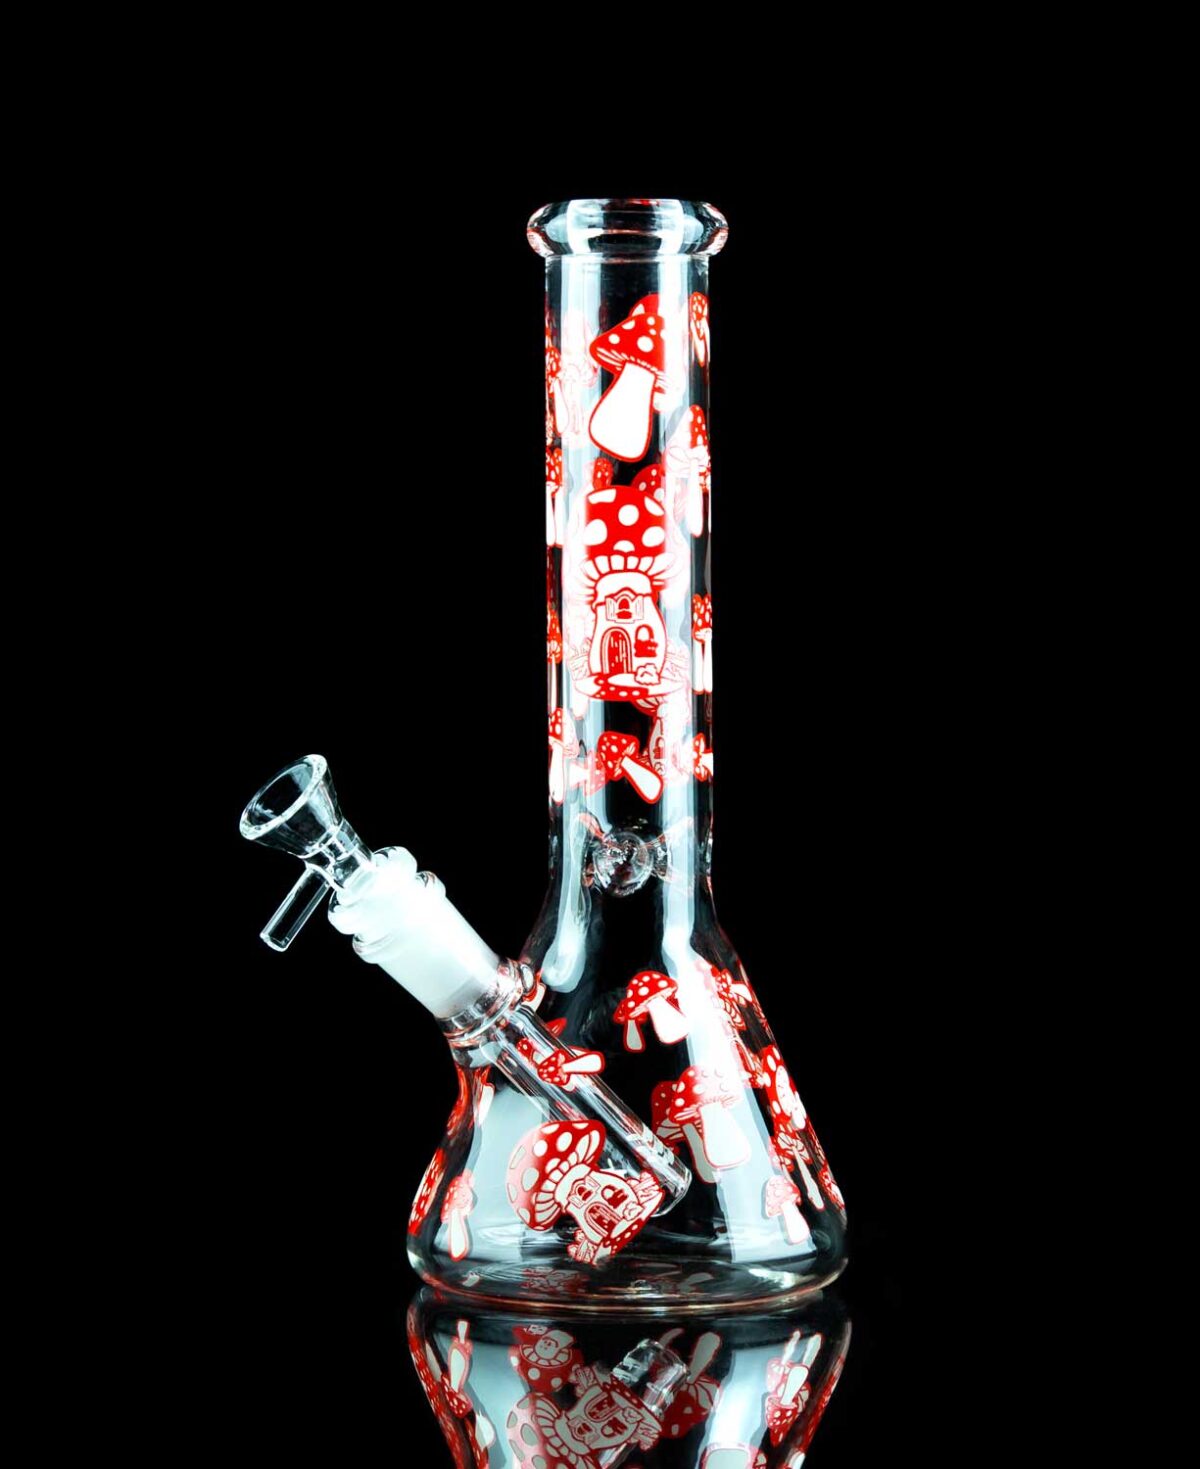 glow in the dark musroom bong with red houses print